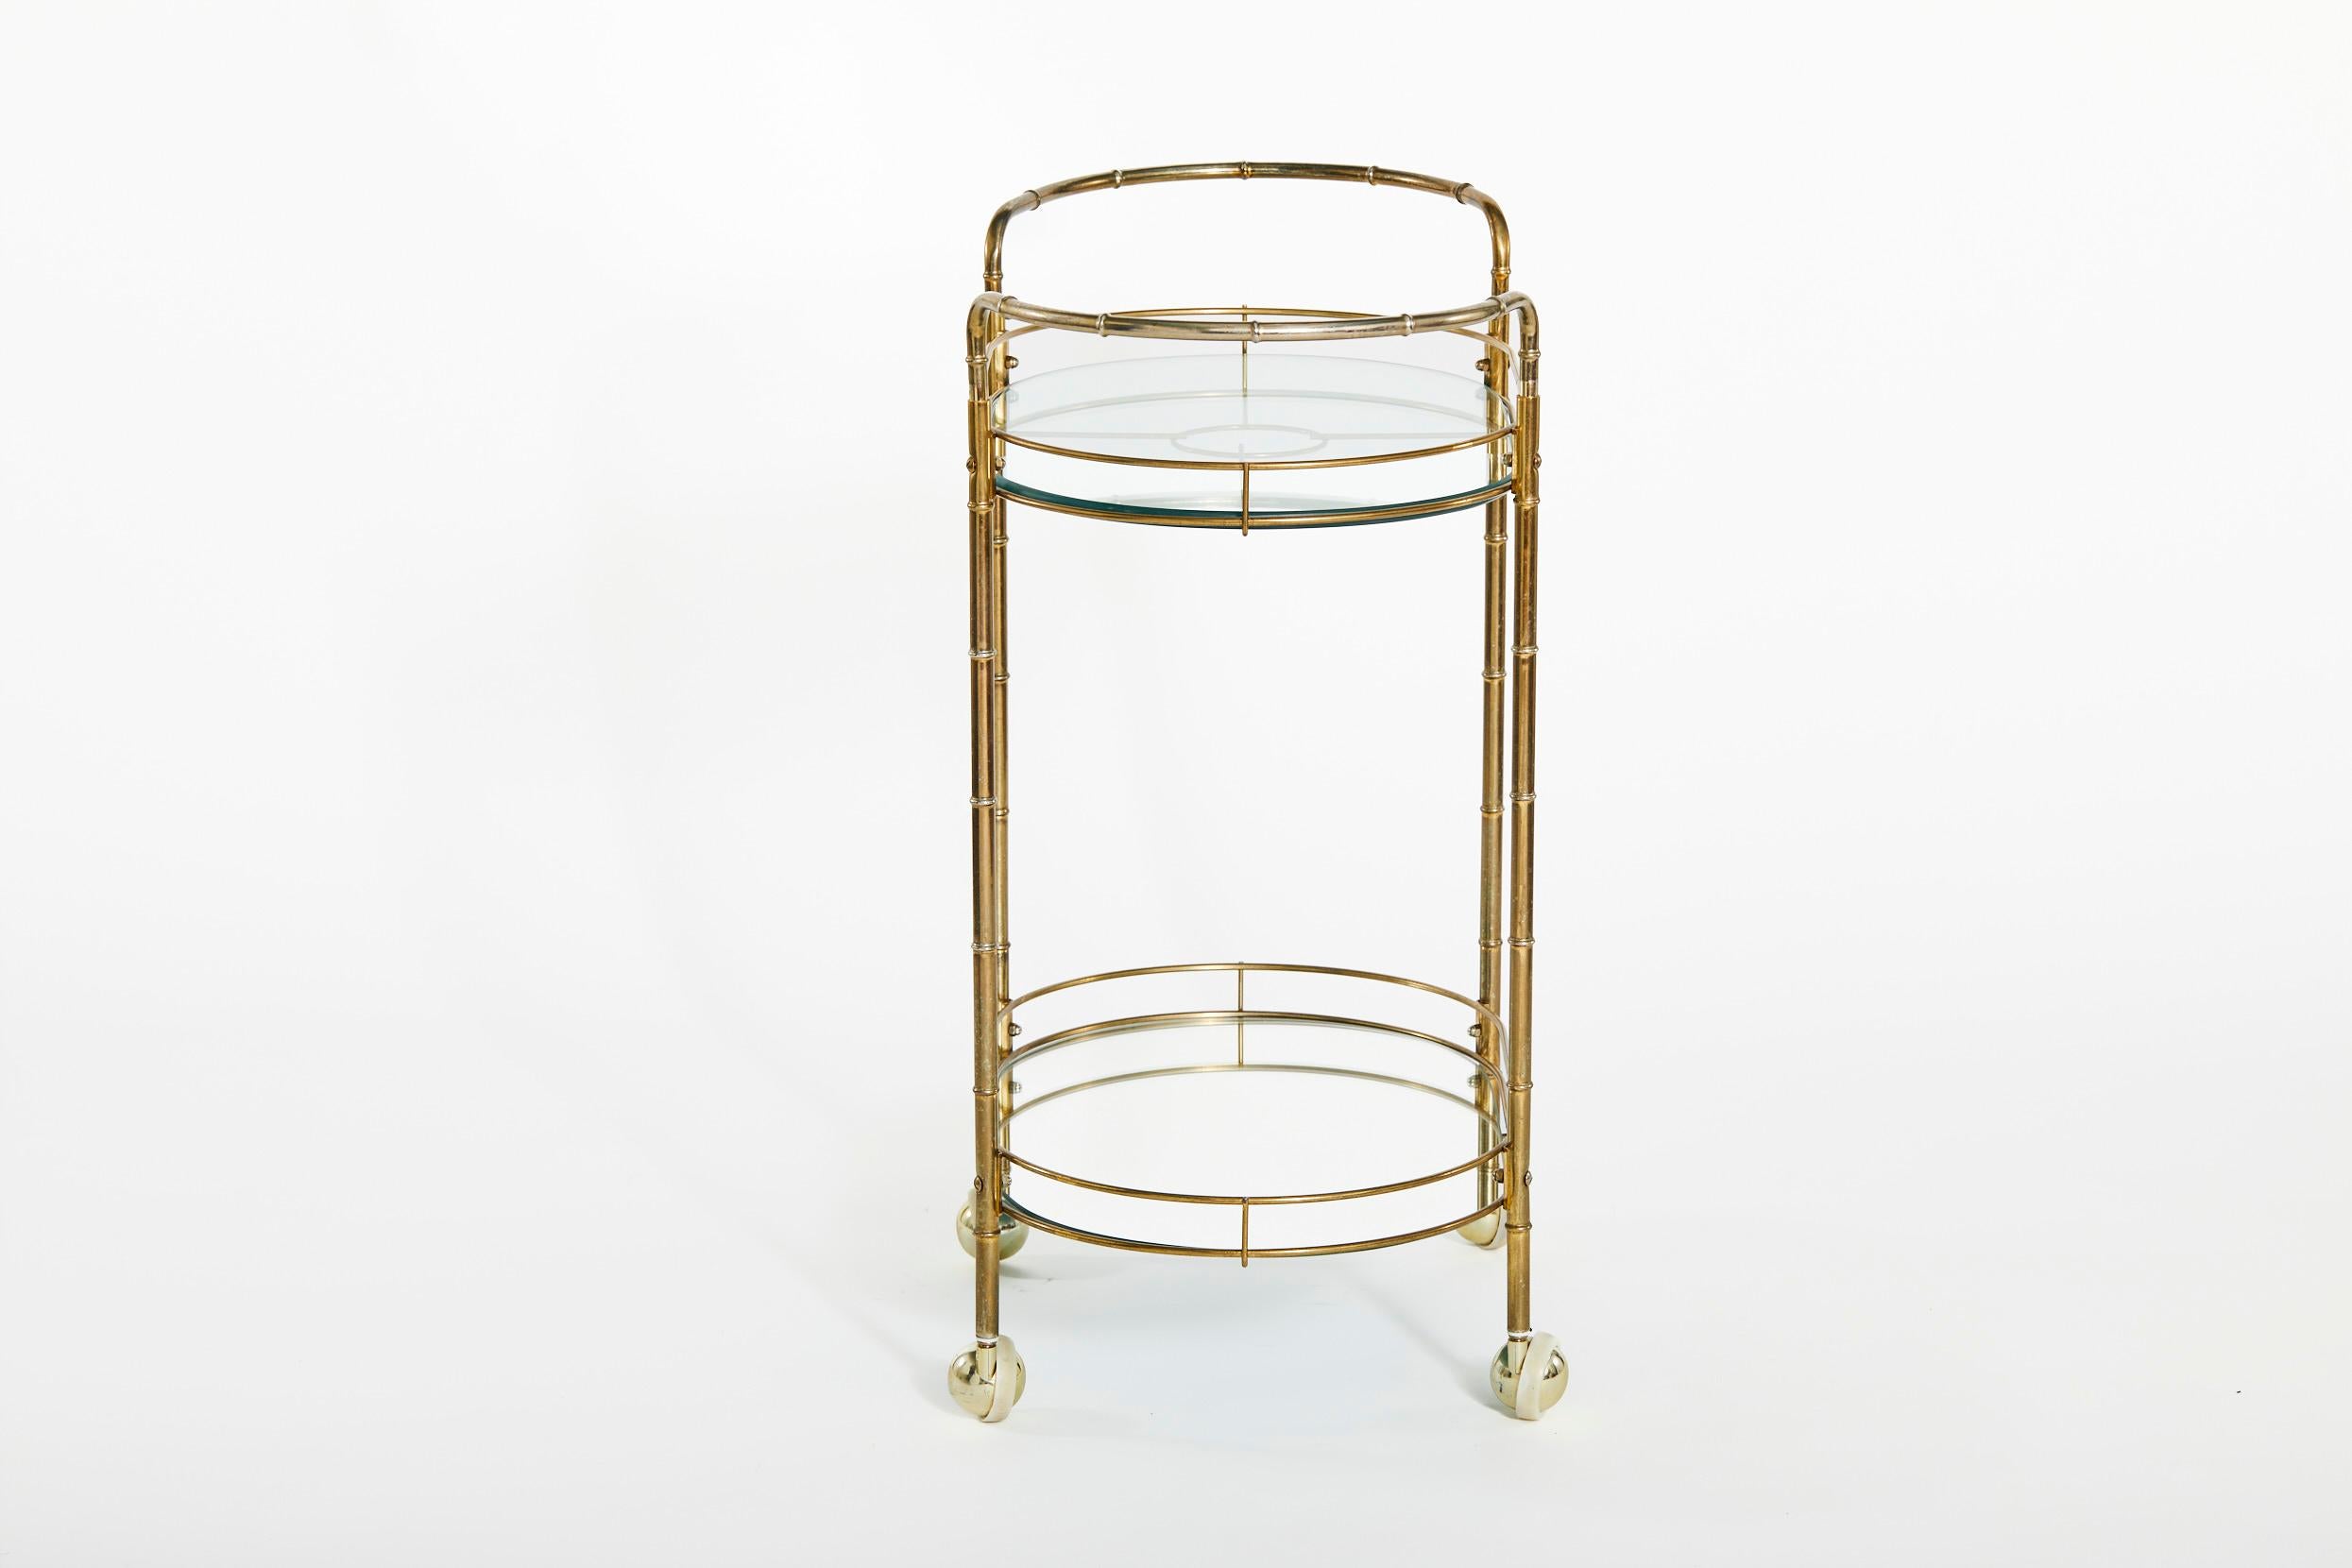 Beautiful mid 20th century brass frame with glass top two tiered wheeled bar cart. The bar cart features heavy glass shelve top, a lower mirrored shelve with side handle. The cart is in great condition. Minor wear consistent with age / use. The cart